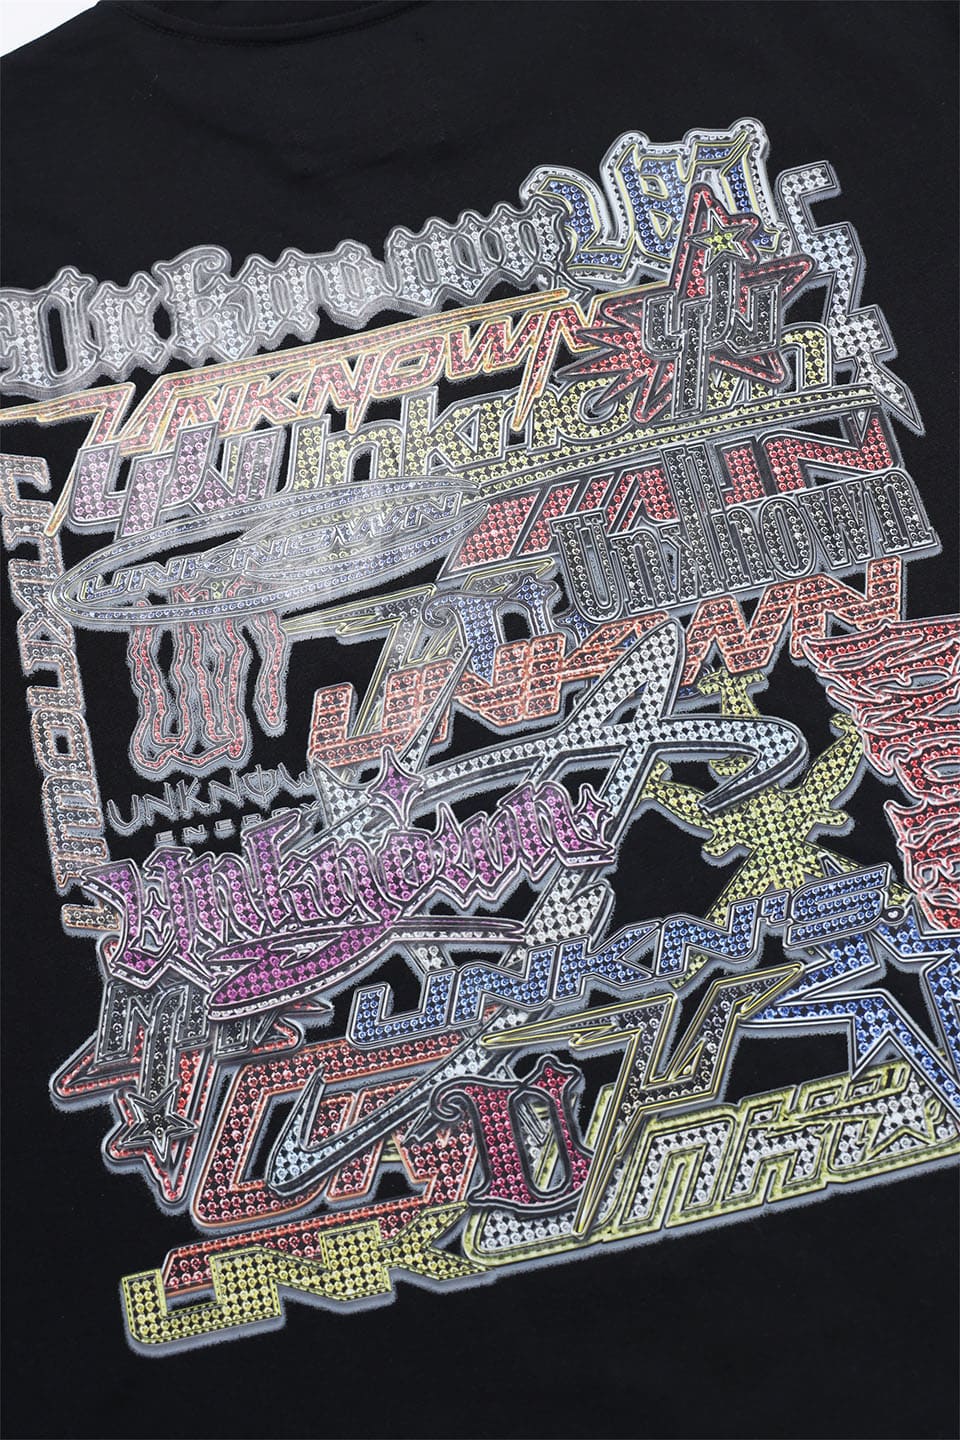 Multi Logo Iced Out Tee